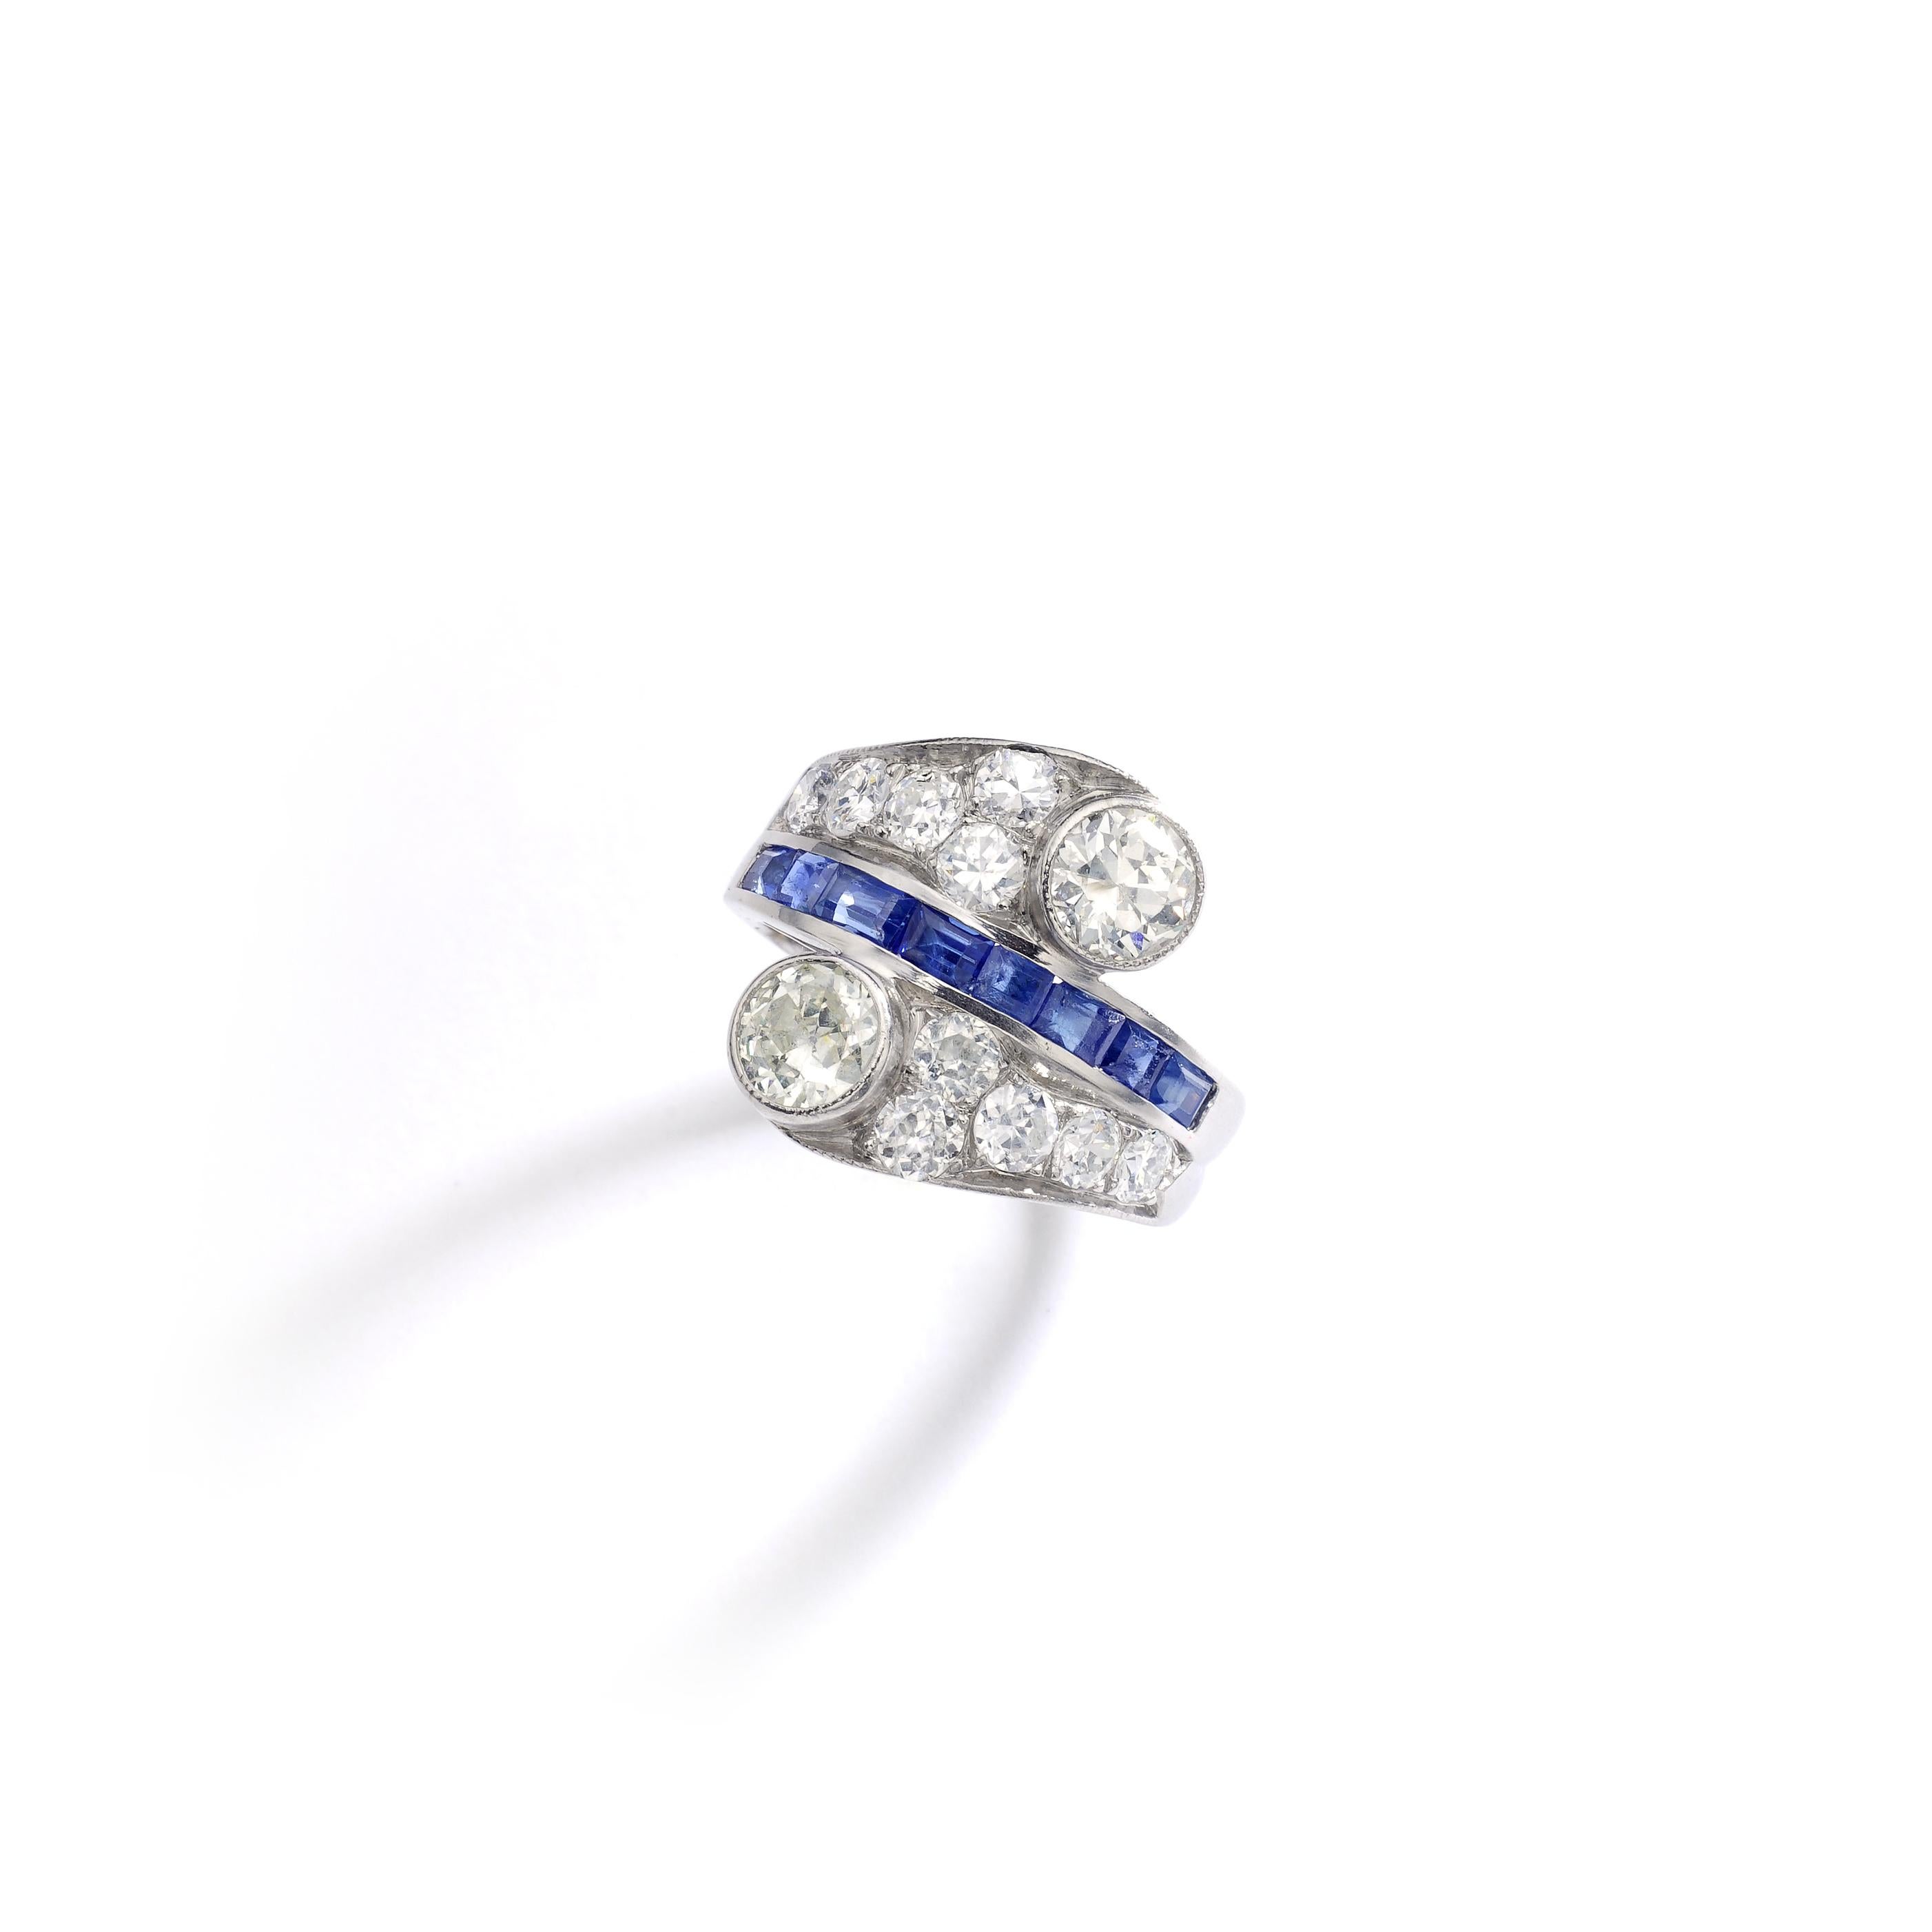 This 'Vous et Moi' ring is all in platinum set by Old-mine cut diamond. Two diamonds are more significant and separated by a calibrated Blue Sapphire line.
Total Diamond weight: approximately 2.50 carats.

Ring size: 6 1/4.
Complimentary ring size